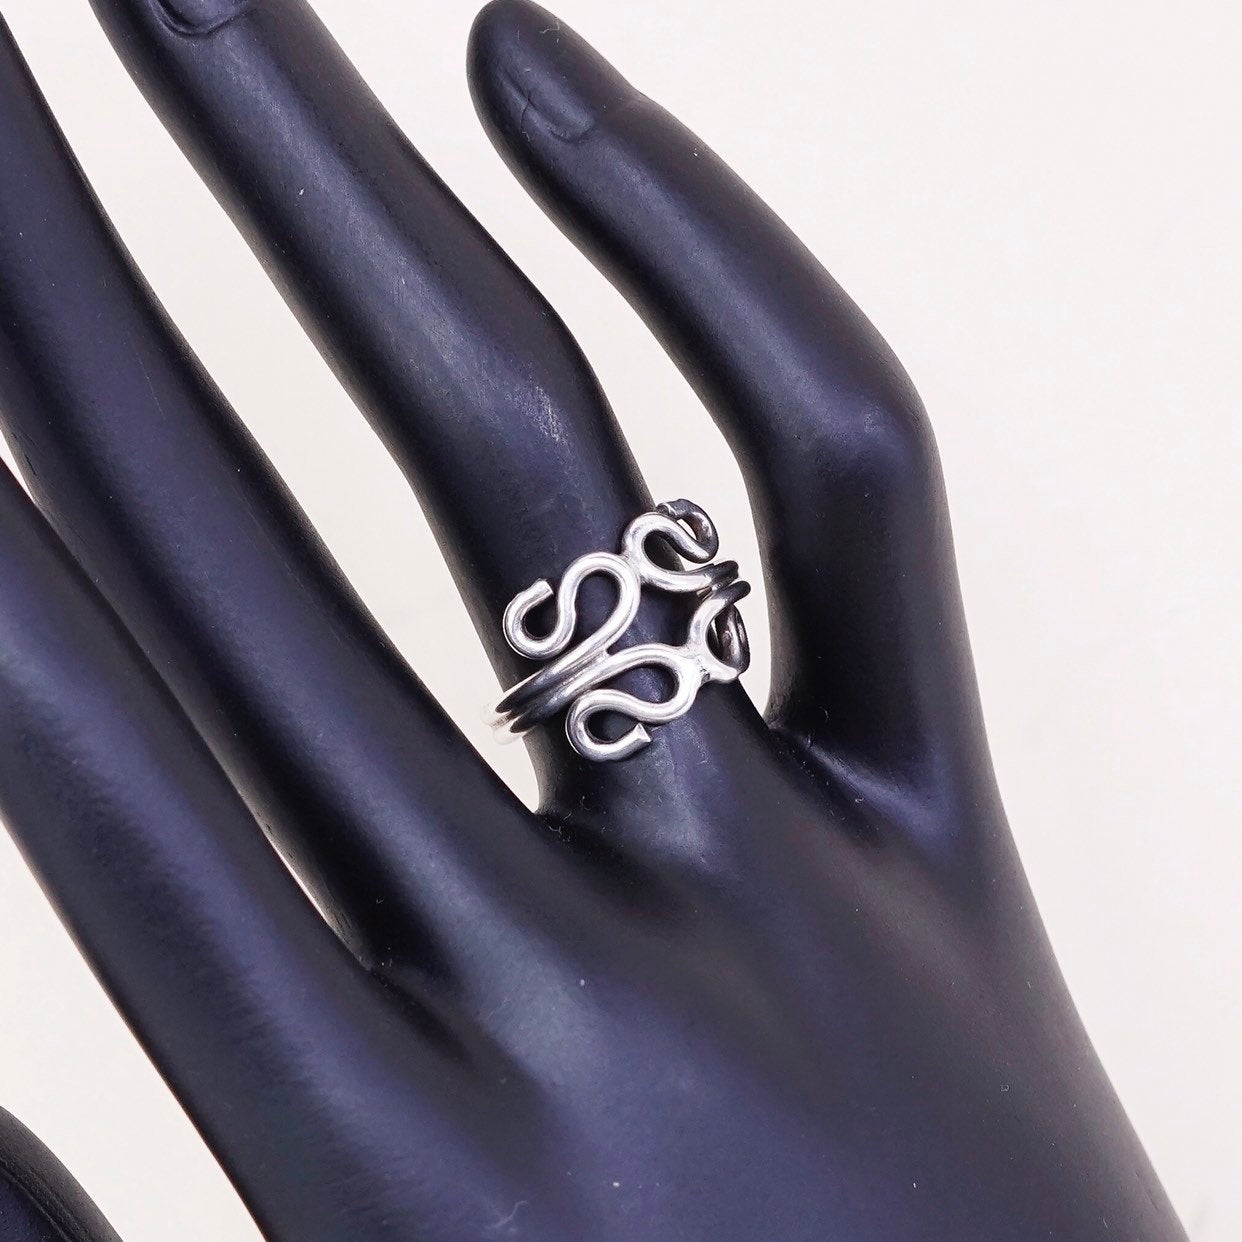 Size 4.5, VTG sterling silver handmade wired ring, 925 filigree band